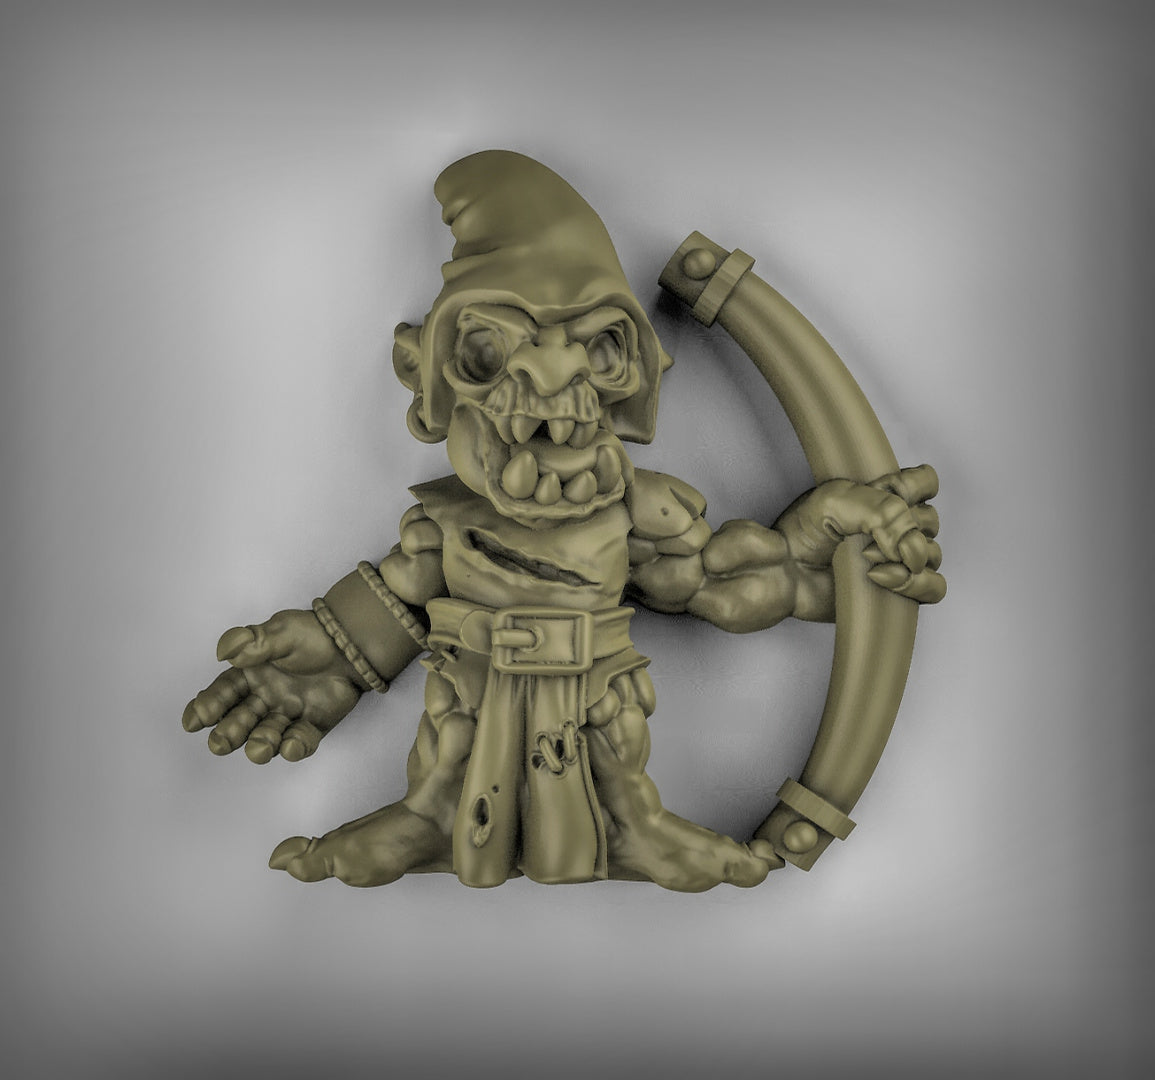 Dead Goblins Resin Miniature for DnD | Tabletop Gaming